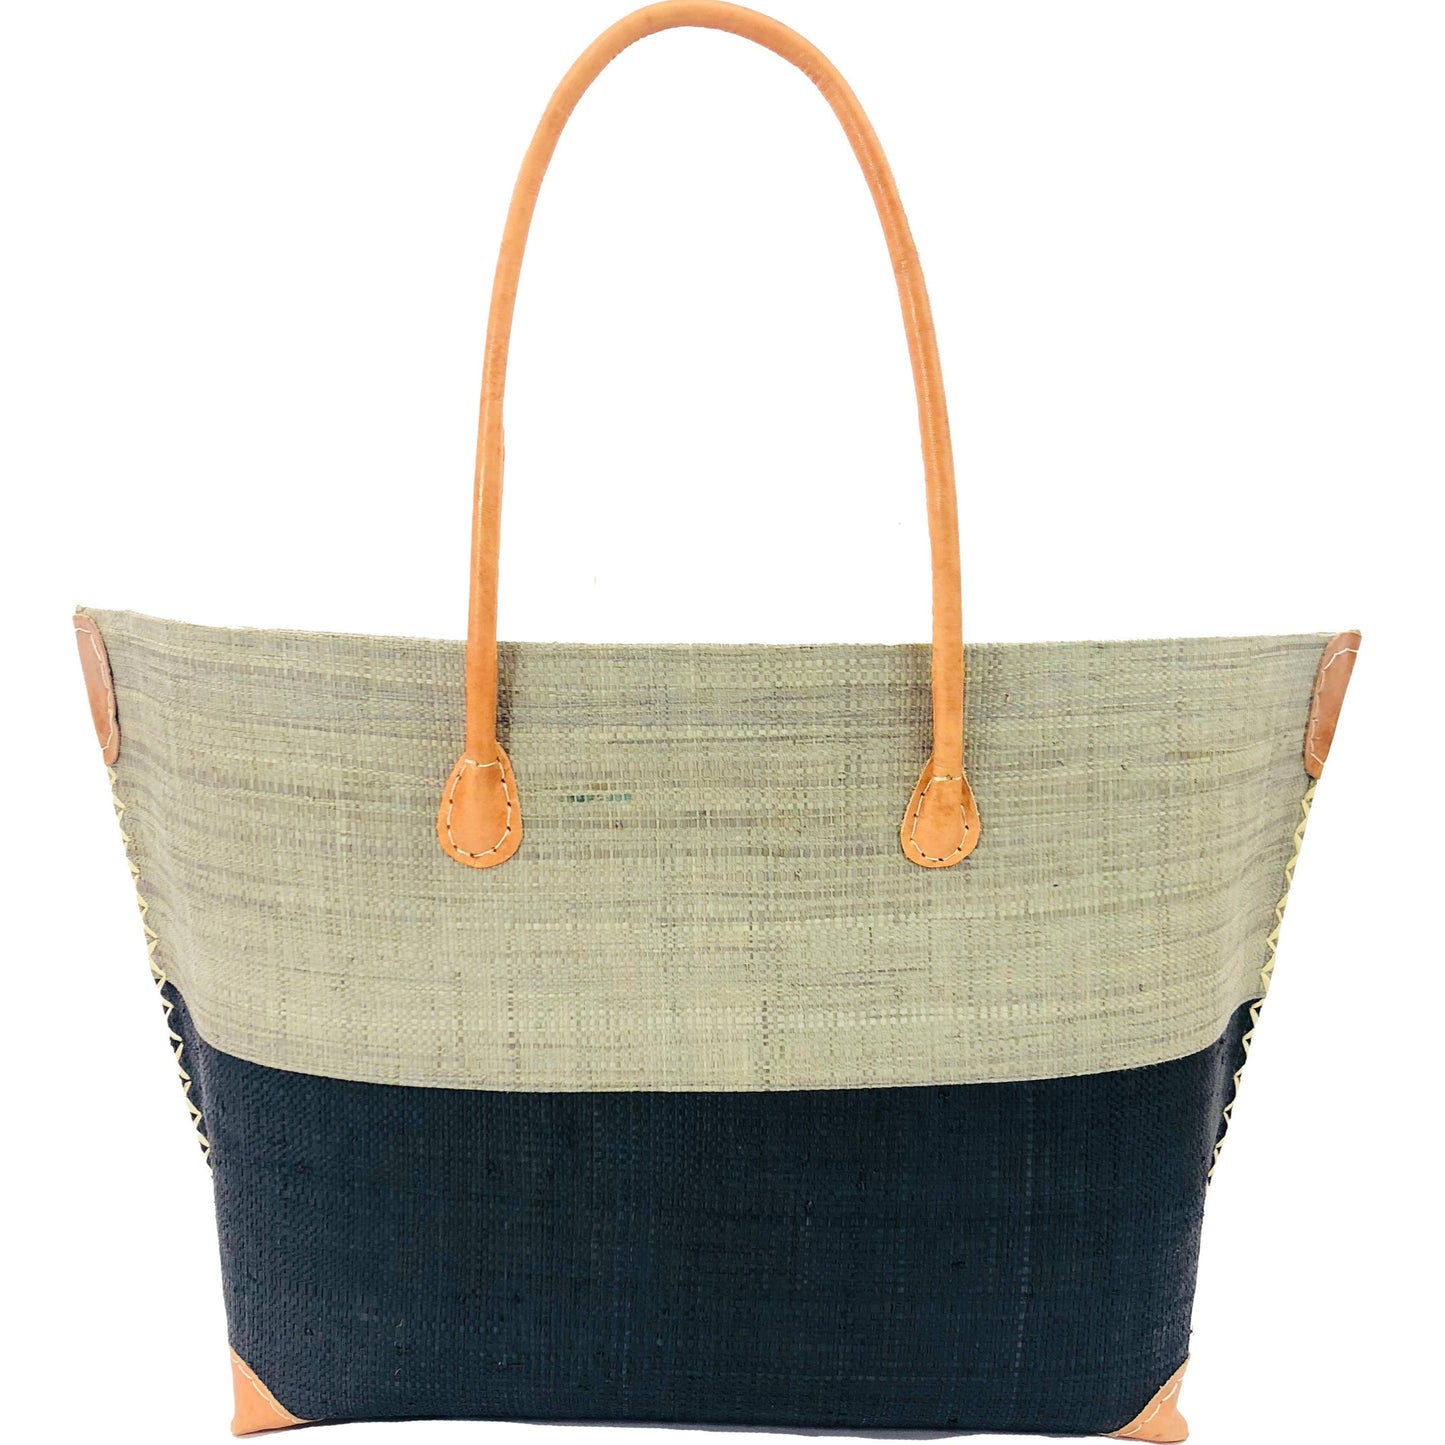 Two tone woven bag with leather detail